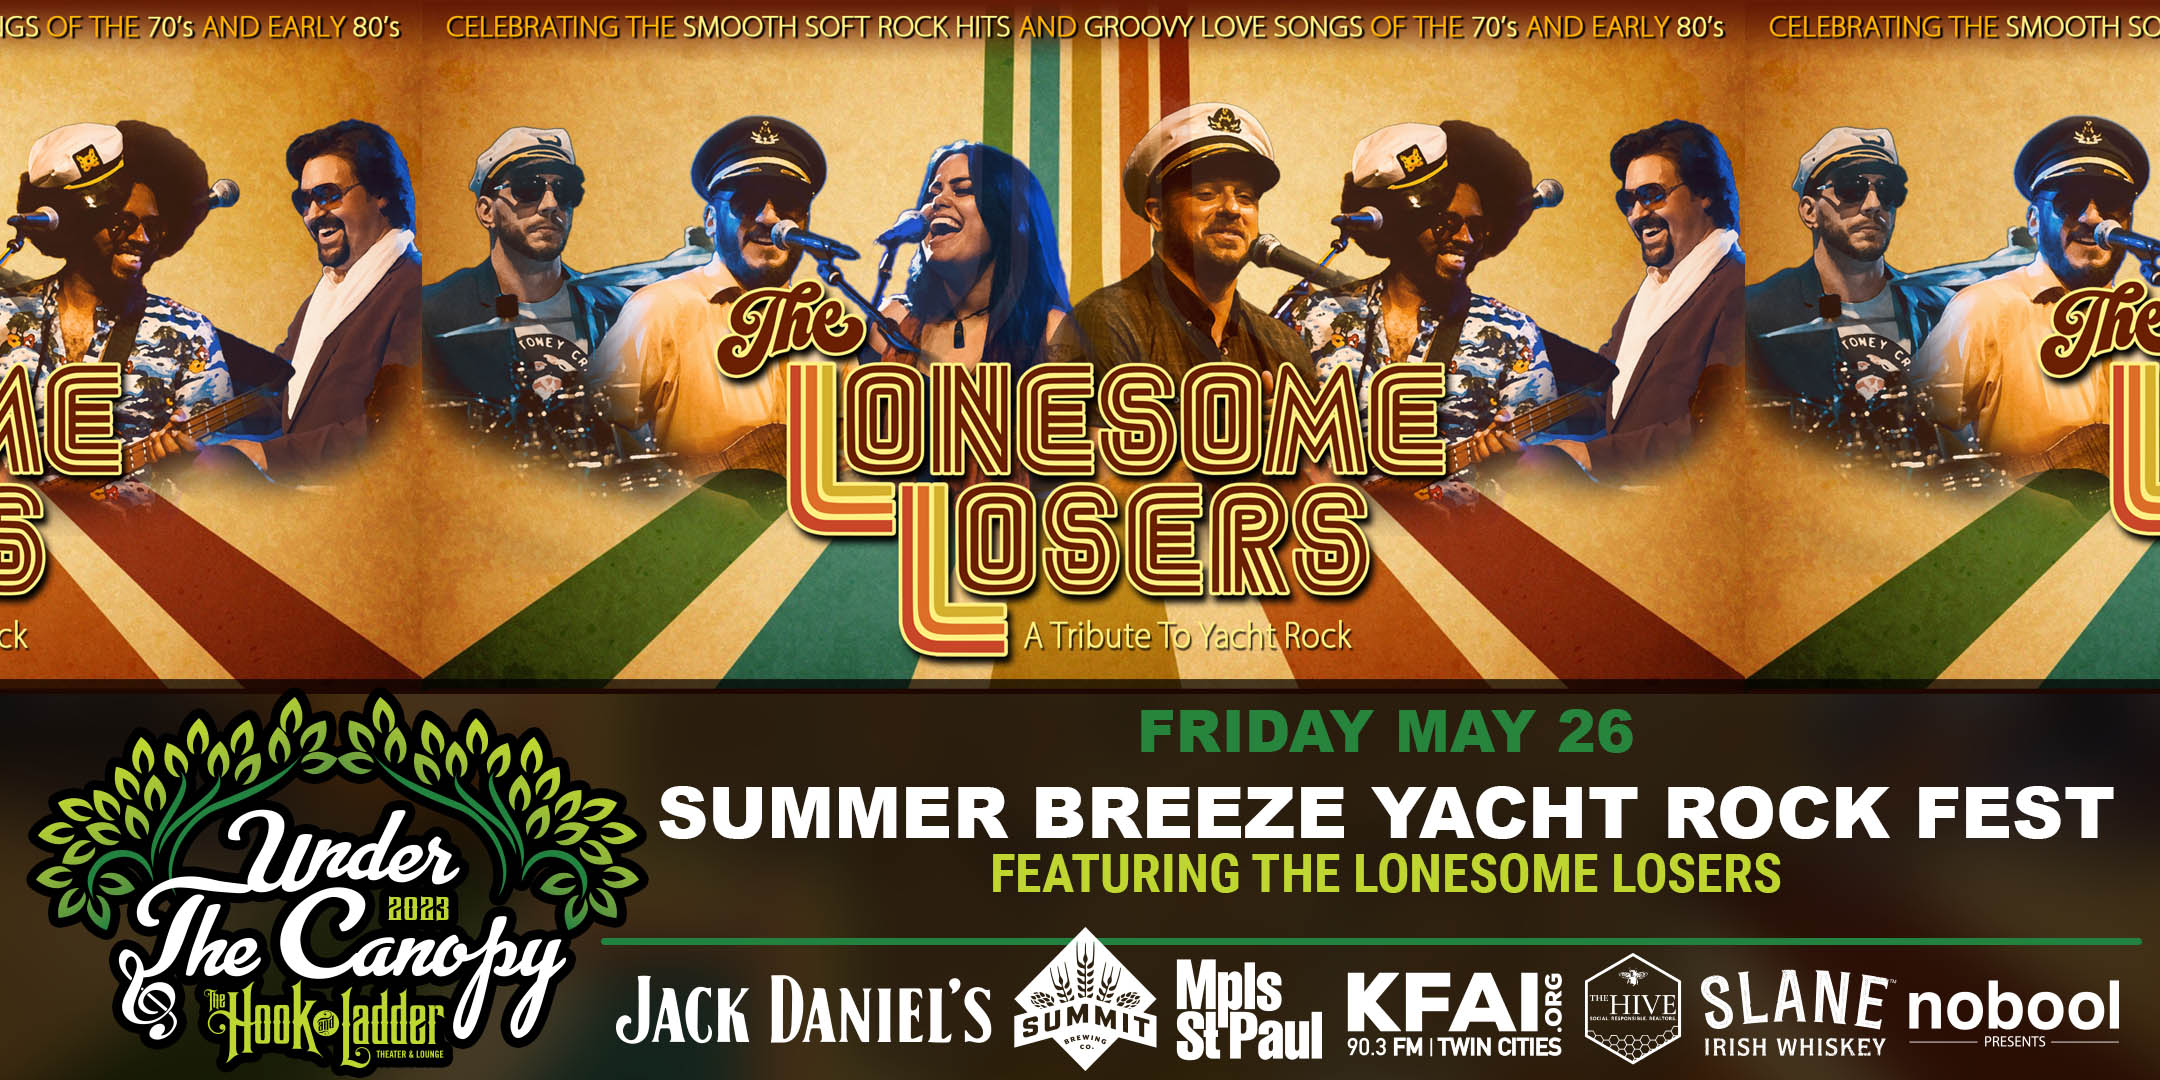 Summer Breeze Yacht Rock Fest featuring The Lonesome Losers Saturday, May 26 Under The Canopy at The Hook and Ladder Theater "An Urban Outdoor Summer Concert Series" Doors 6:00pm :: Music 7:00pm :: 21+ Reserved Seats: $34 GA: $18 ADV / $24 DOS *Does not include Fees